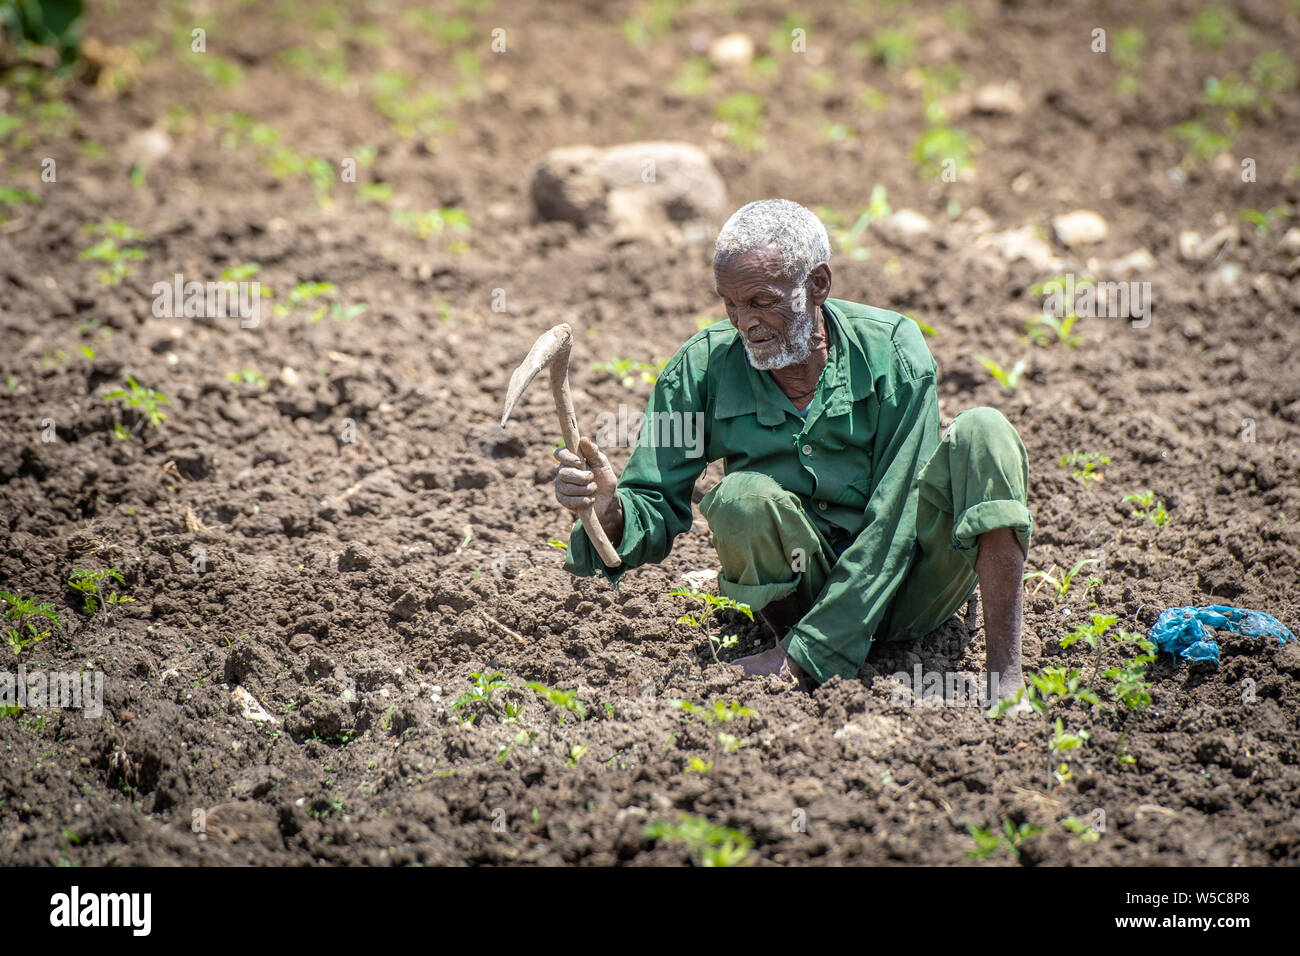 An elderly Ethiopian farmer uses a wooden hoe to tend to his fields, Debre Berhan, Ethiopia. Stock Photo